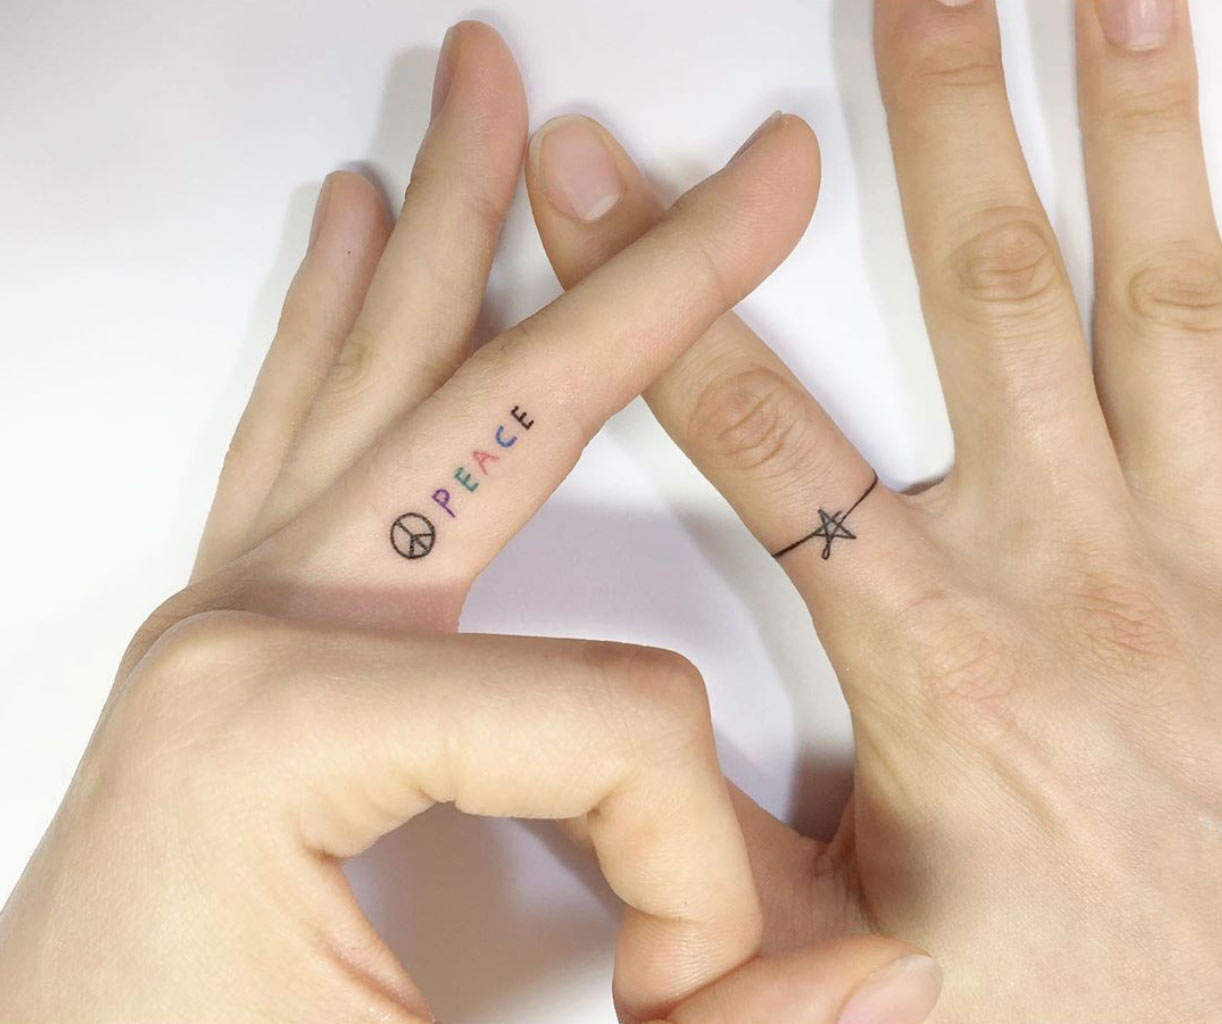 Tattoo For Girls On Hand, Small Hand Tattoos For Girls